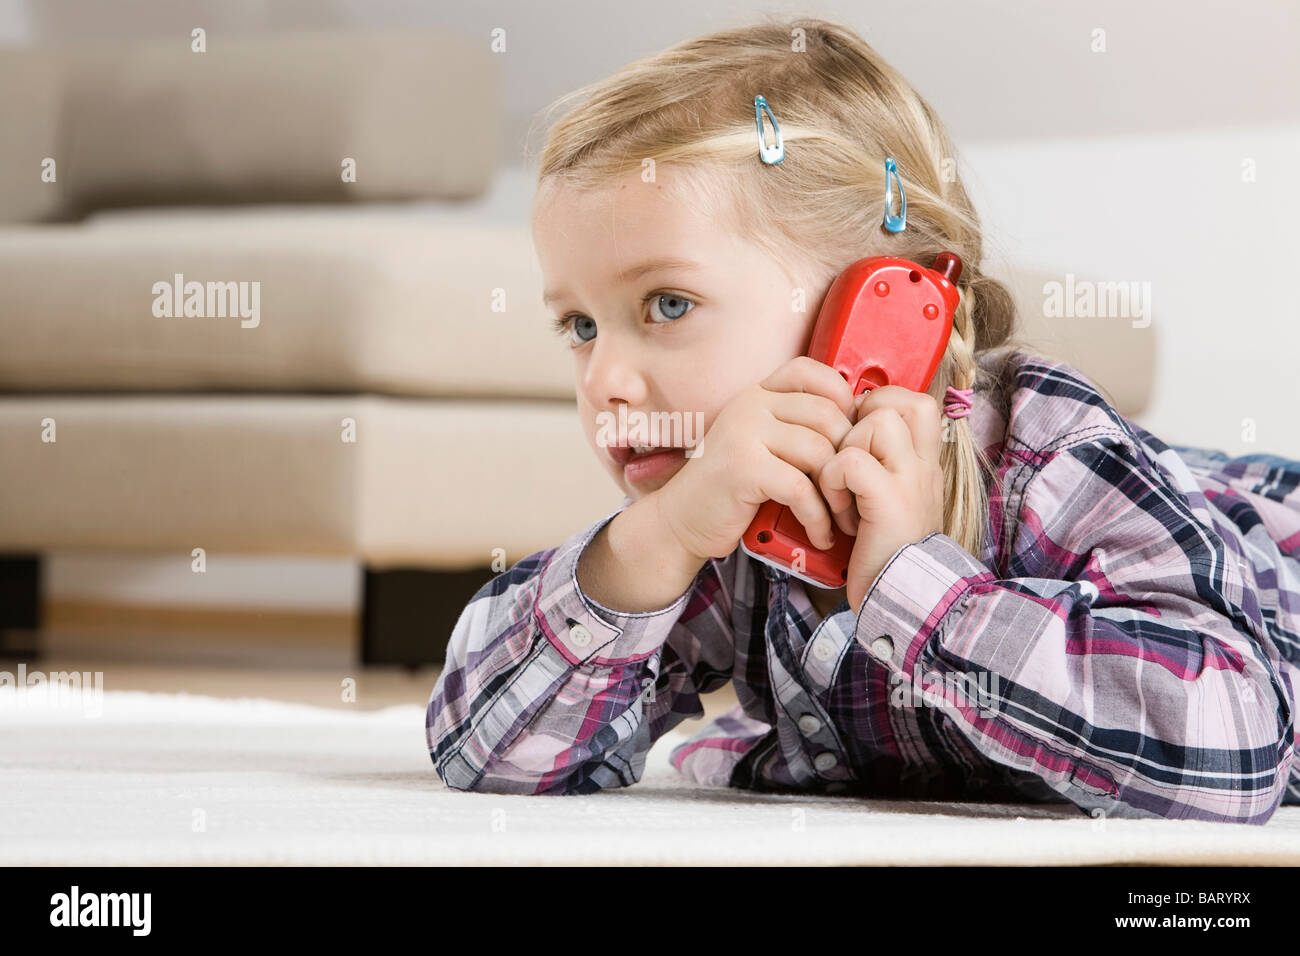 Little girl (3-4) using toy phone Stock Photo